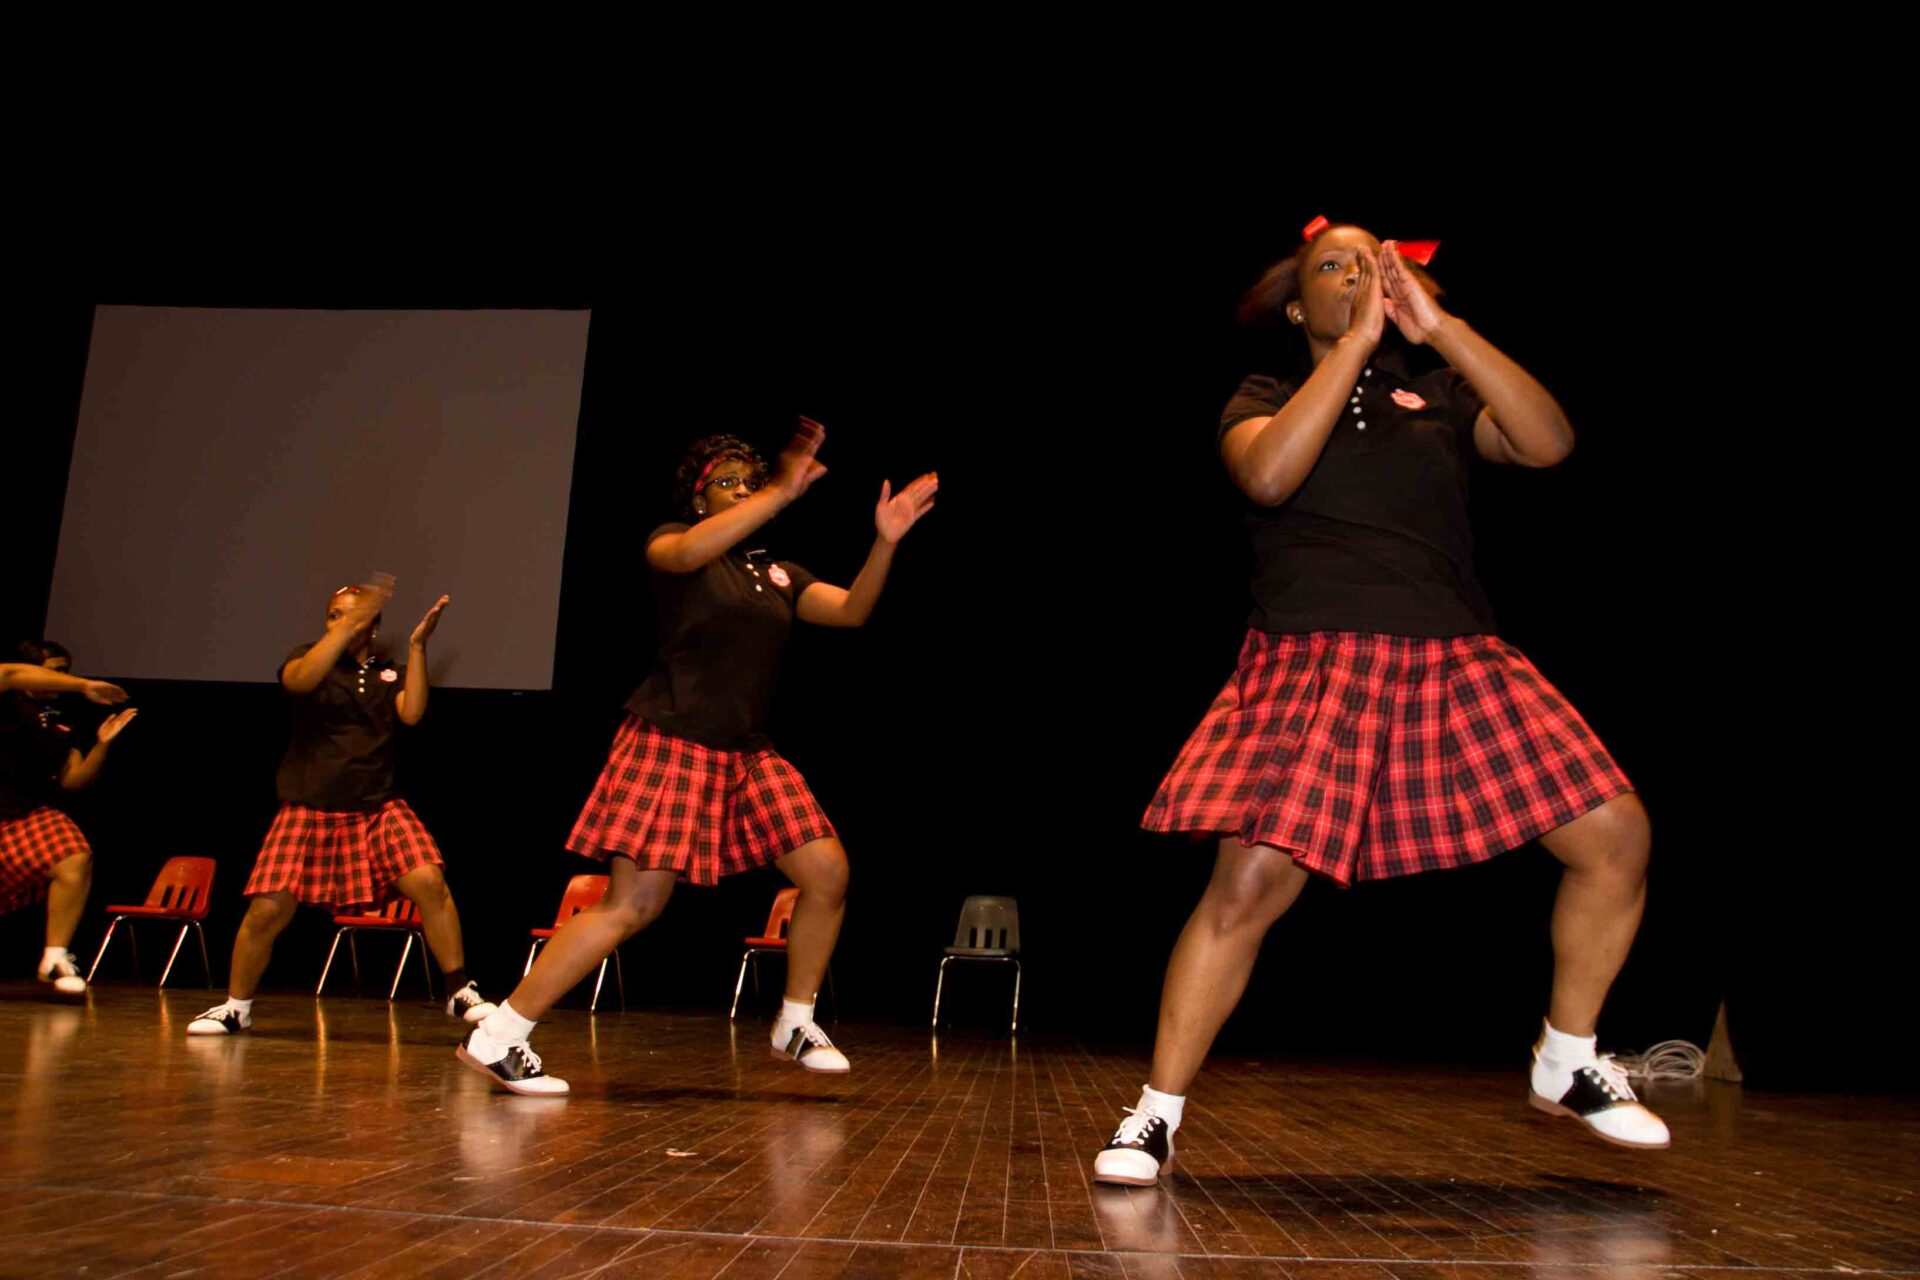 8th Annual FaceTime Midwest Step Show hosted on the University of Minnesota Campus captured by Corey Collins for Moda Photography and Cordavii Consulting